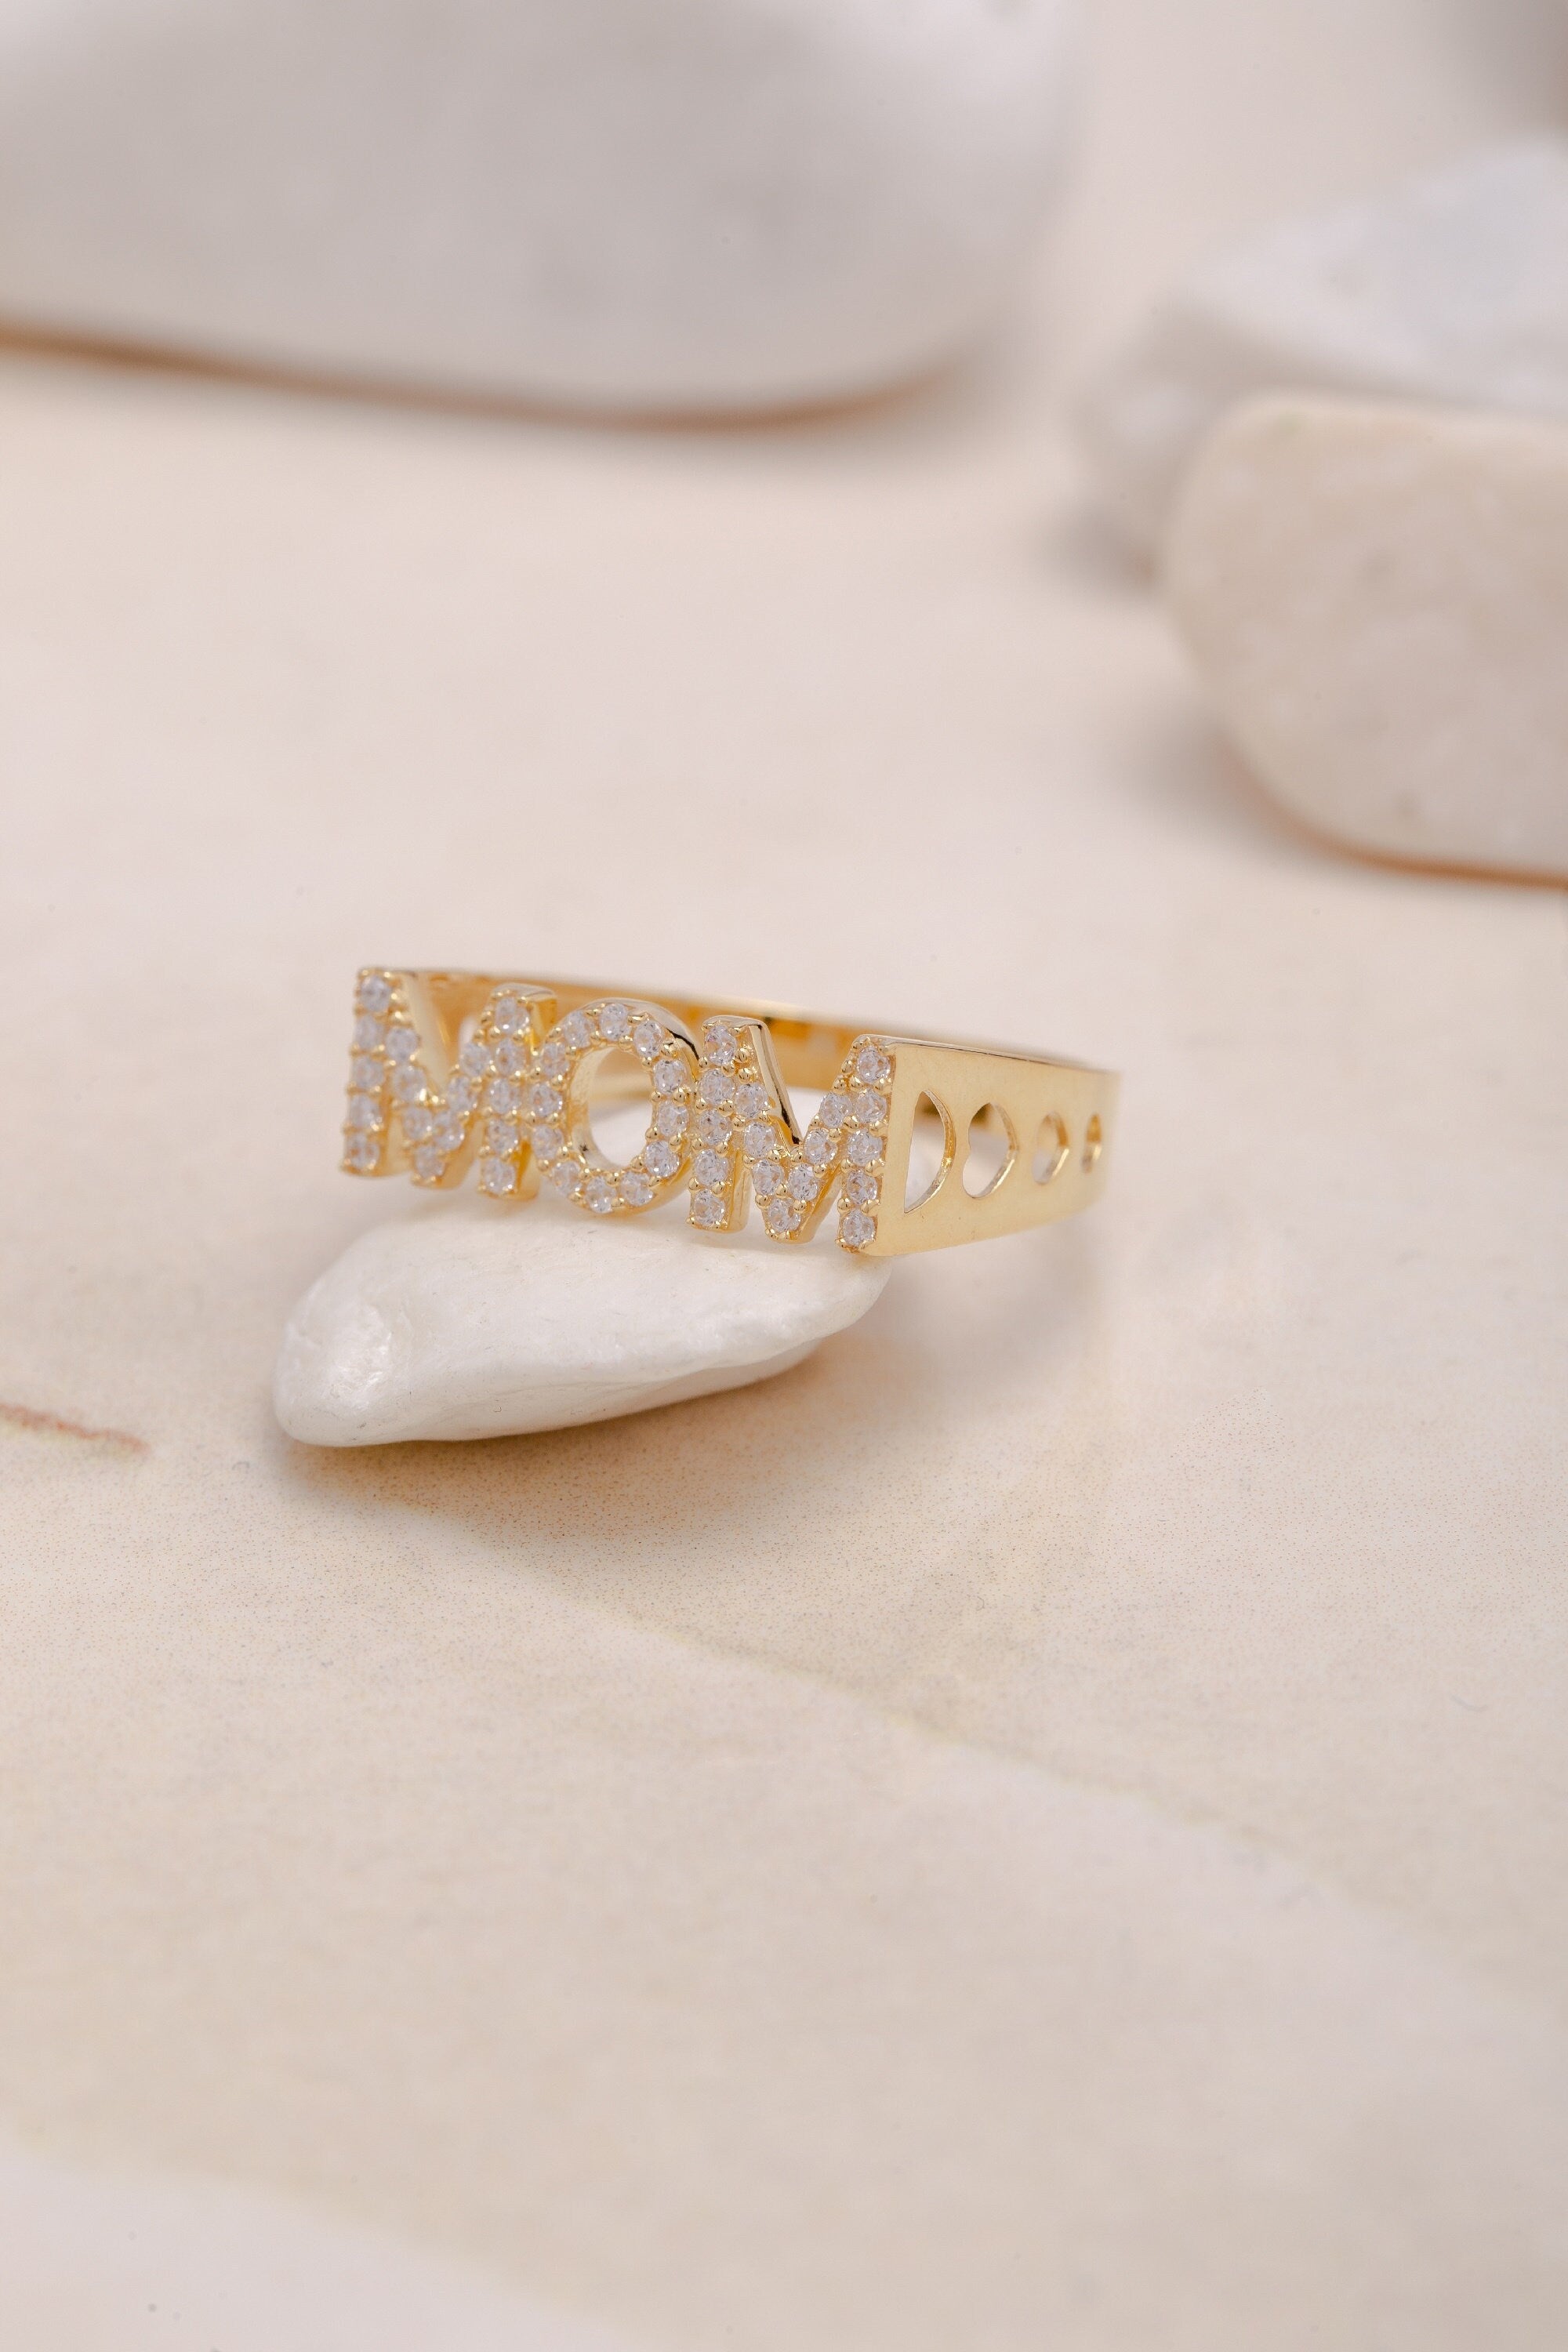 14K Gold Diamond Mama Ring, Mom Ring, Handmade Diamond Mother Ring, Solid Gold Diamond Mama Ring, Gift for Mother, Jewelry Gift Idea